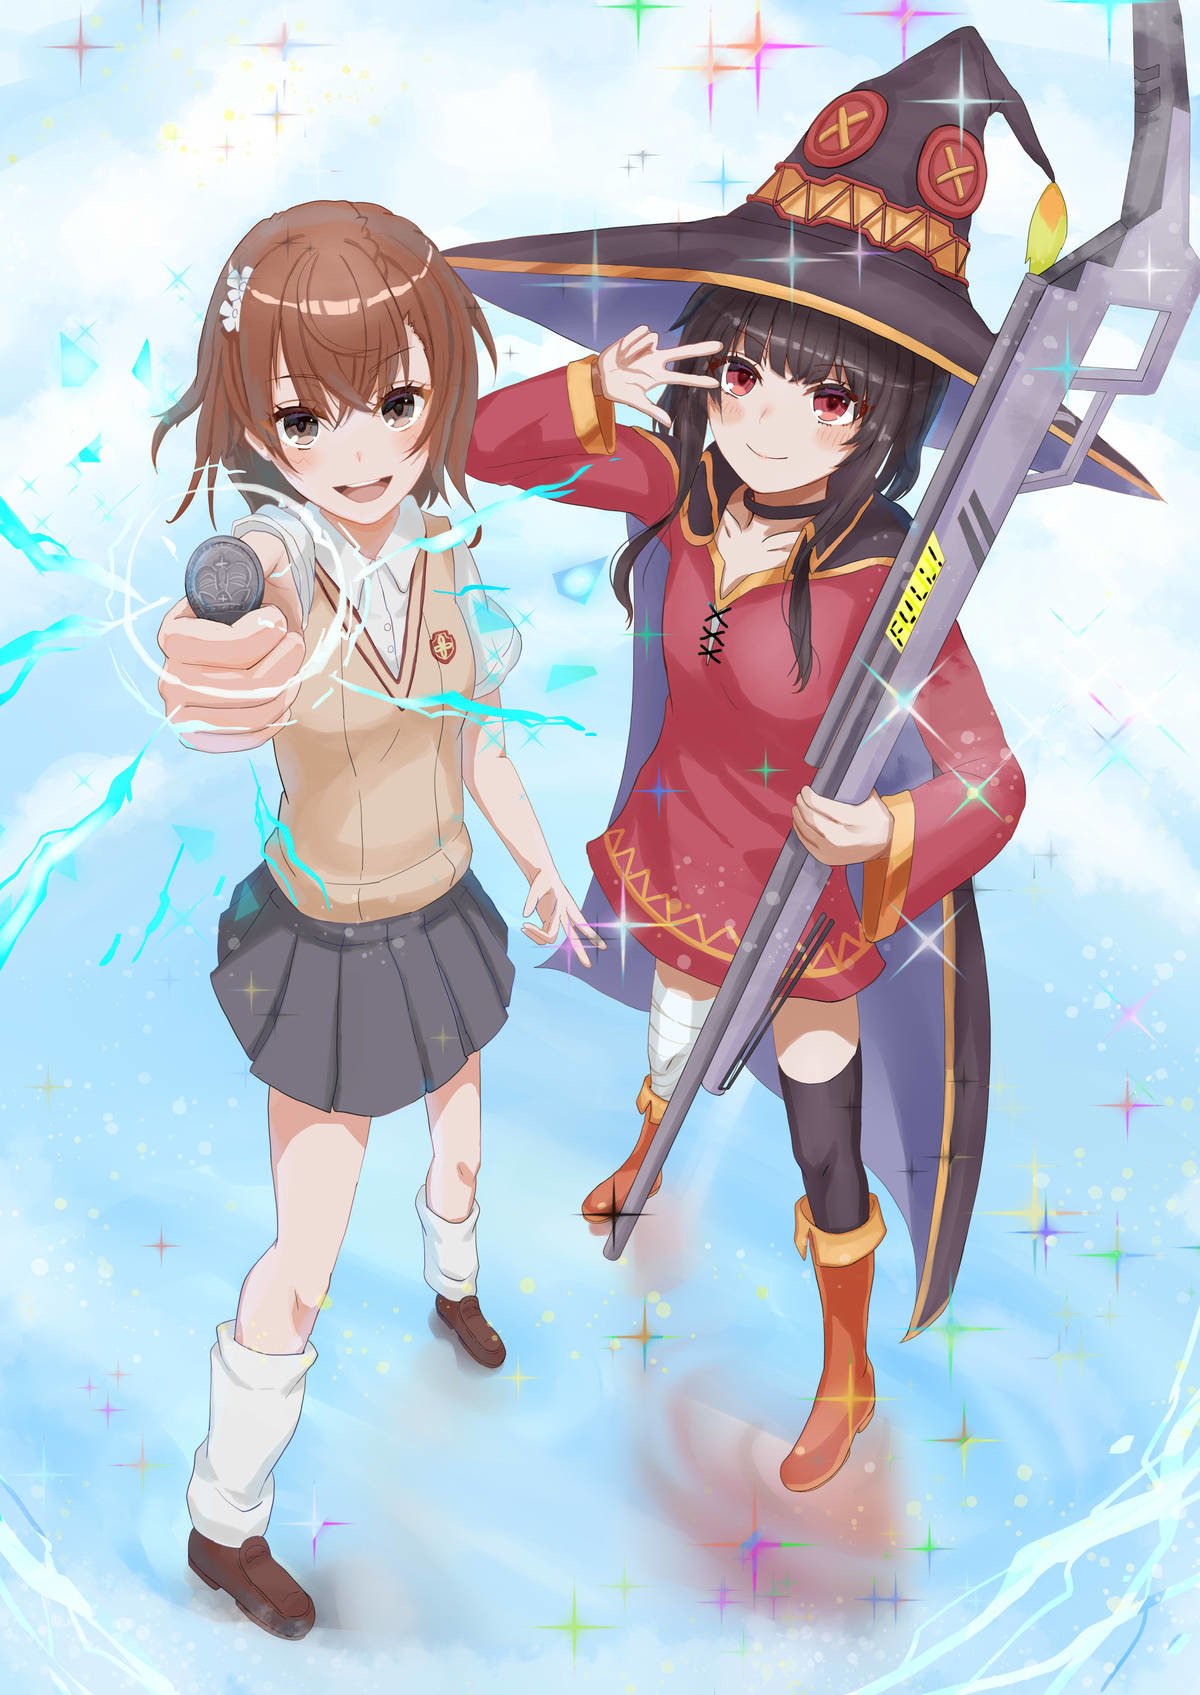 Daily Megu - 1173: Collateral Damage Girls. join list: DailySplosion (826 subs)Mention History Source: .. Stop destroying property and raising my electric bill